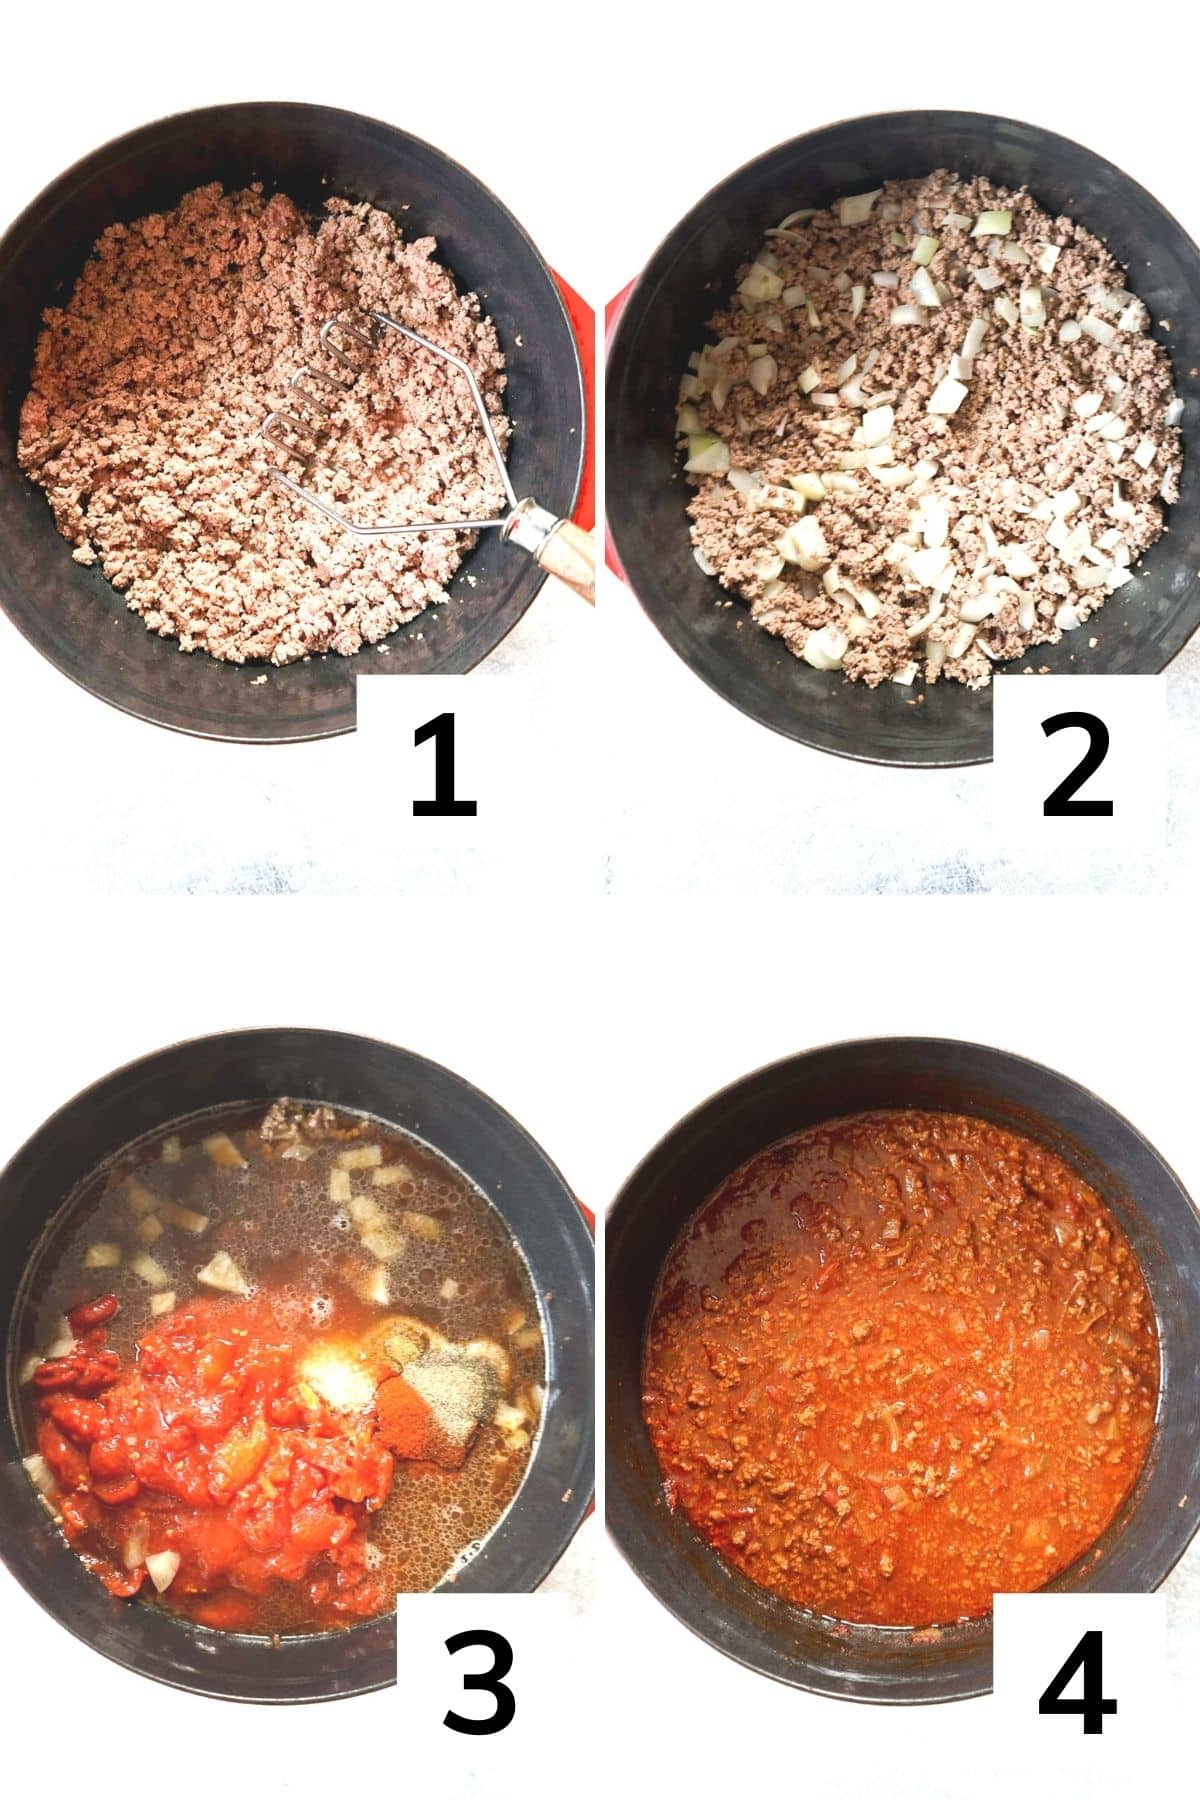 How to make chili con carne step by step.